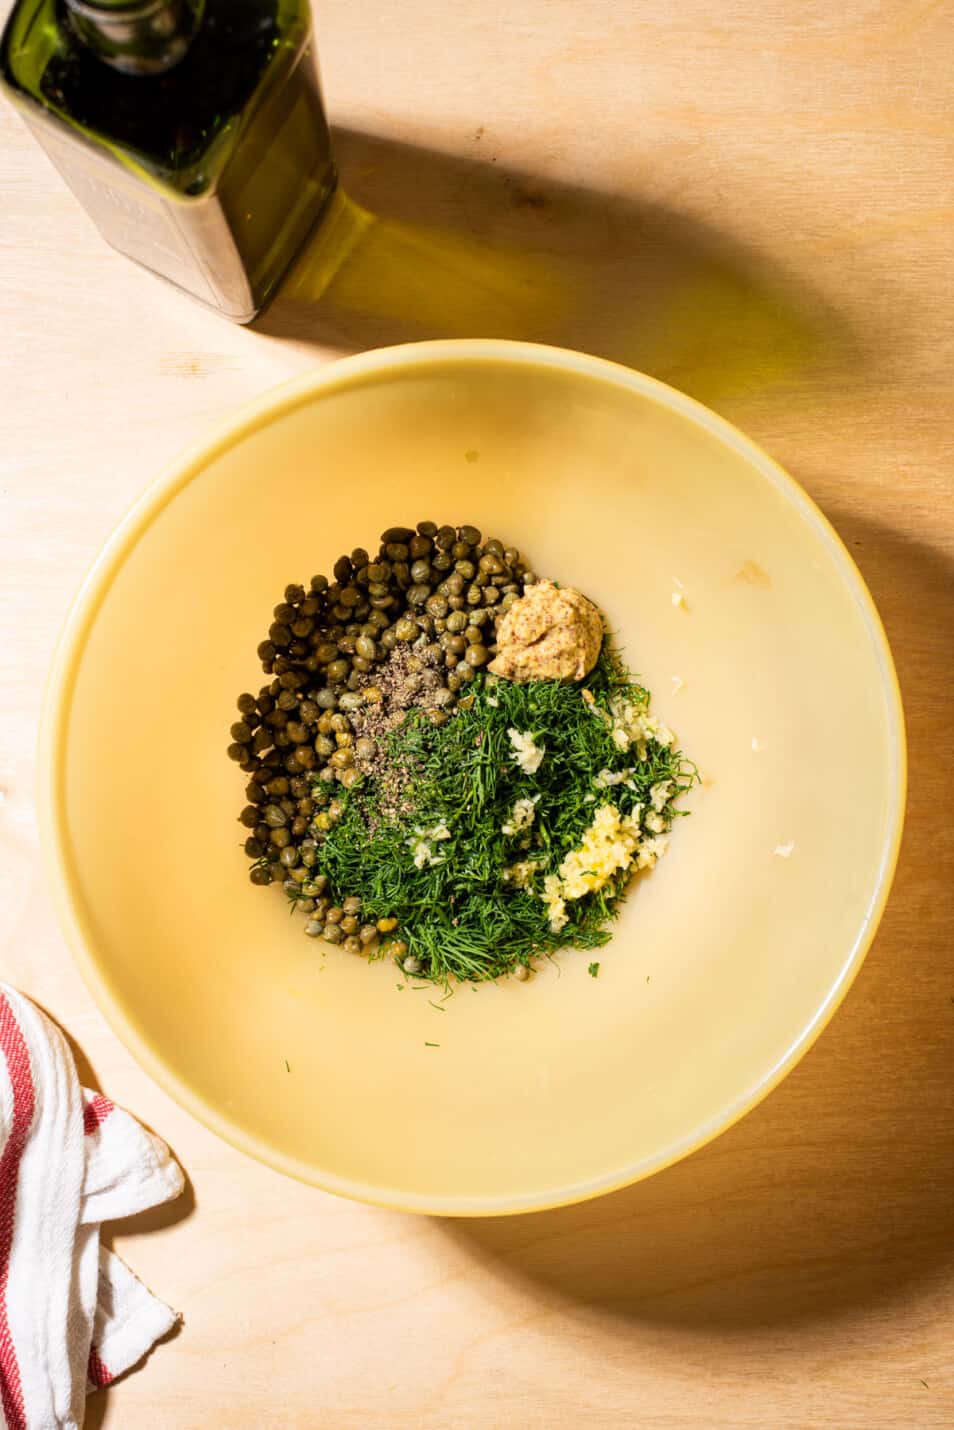 Capers, mustard, garlic, and dill in a large bowl.